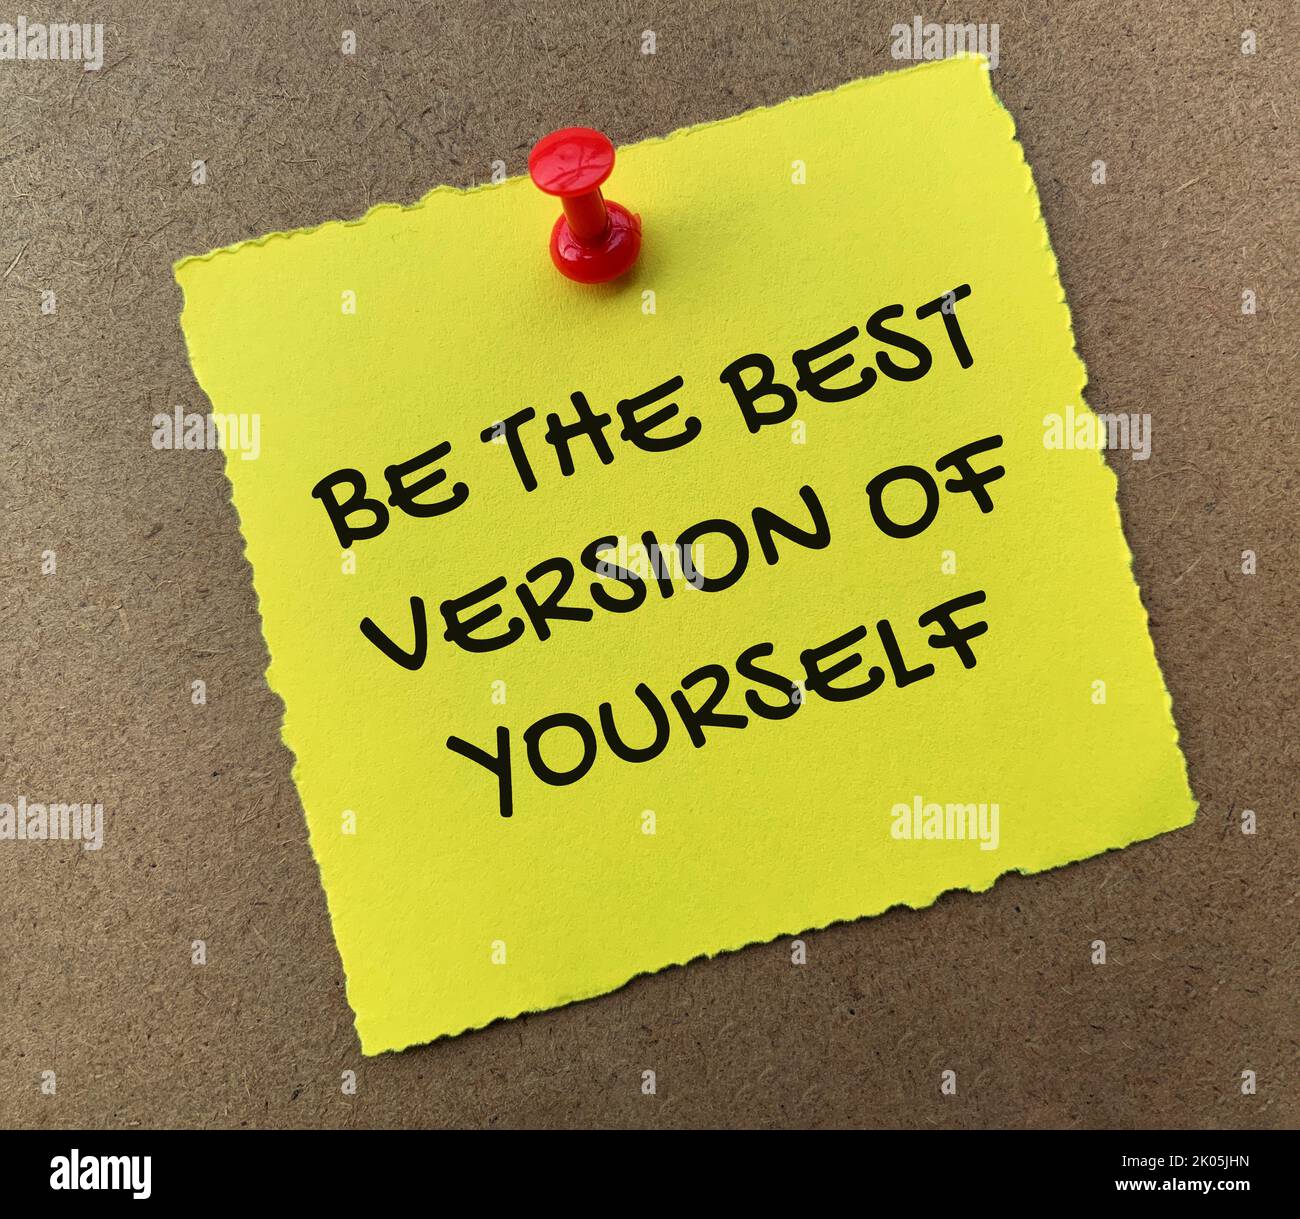 Be the best version of yourself text on yellow notepad with wooden background. Motivational concept. Stock Photo